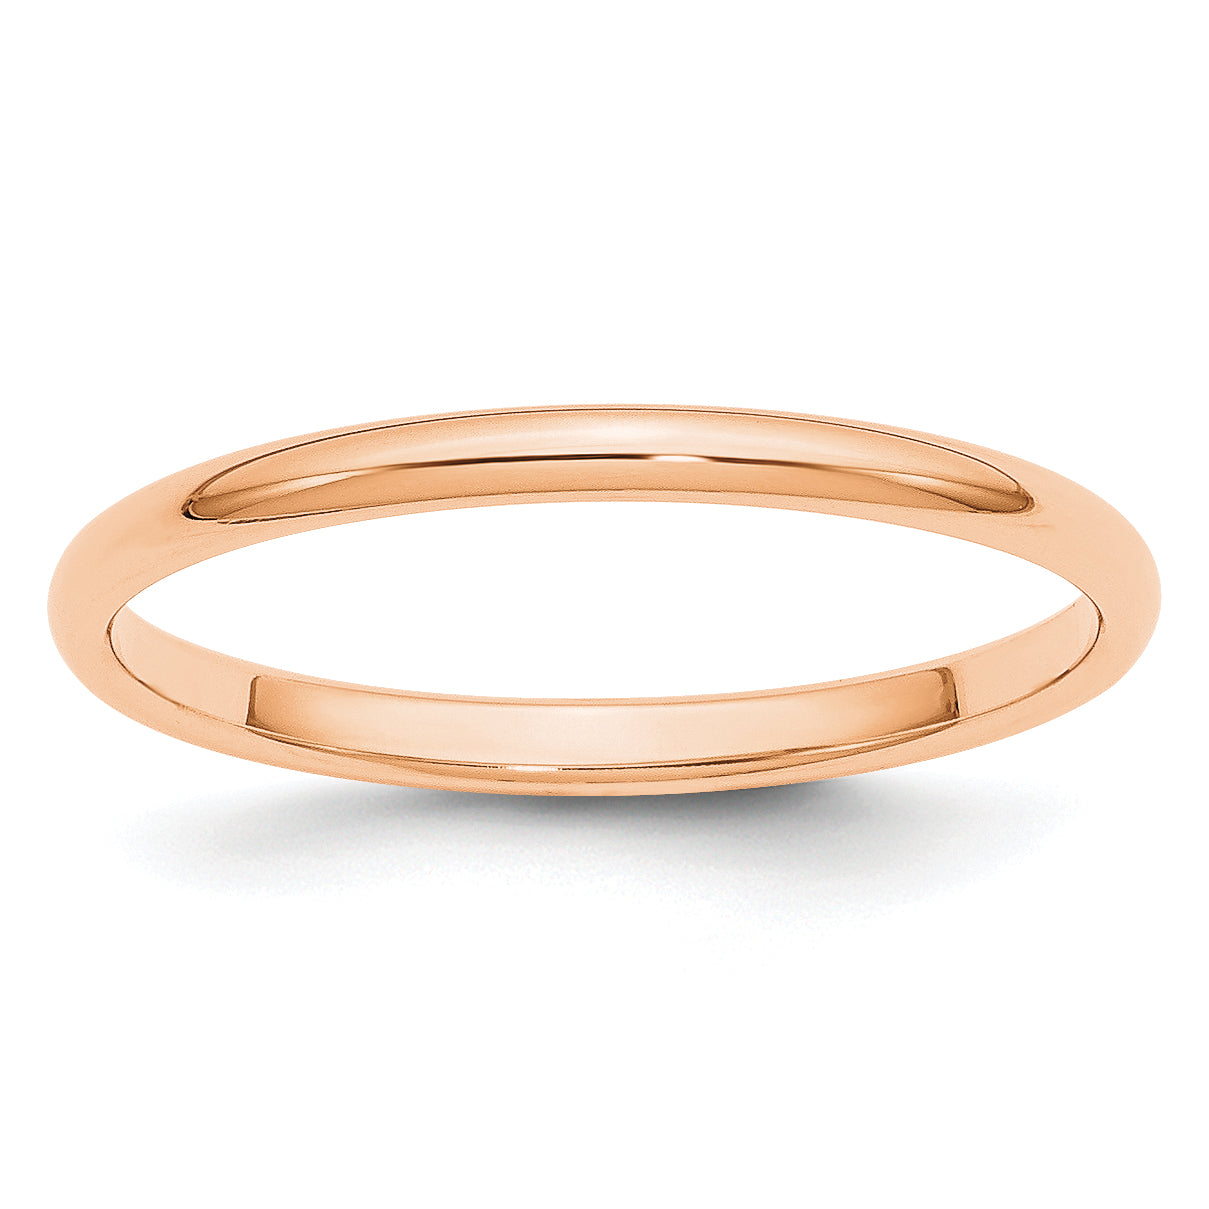 Rose Gold Stainless Steel Ring - Size 6 (M)